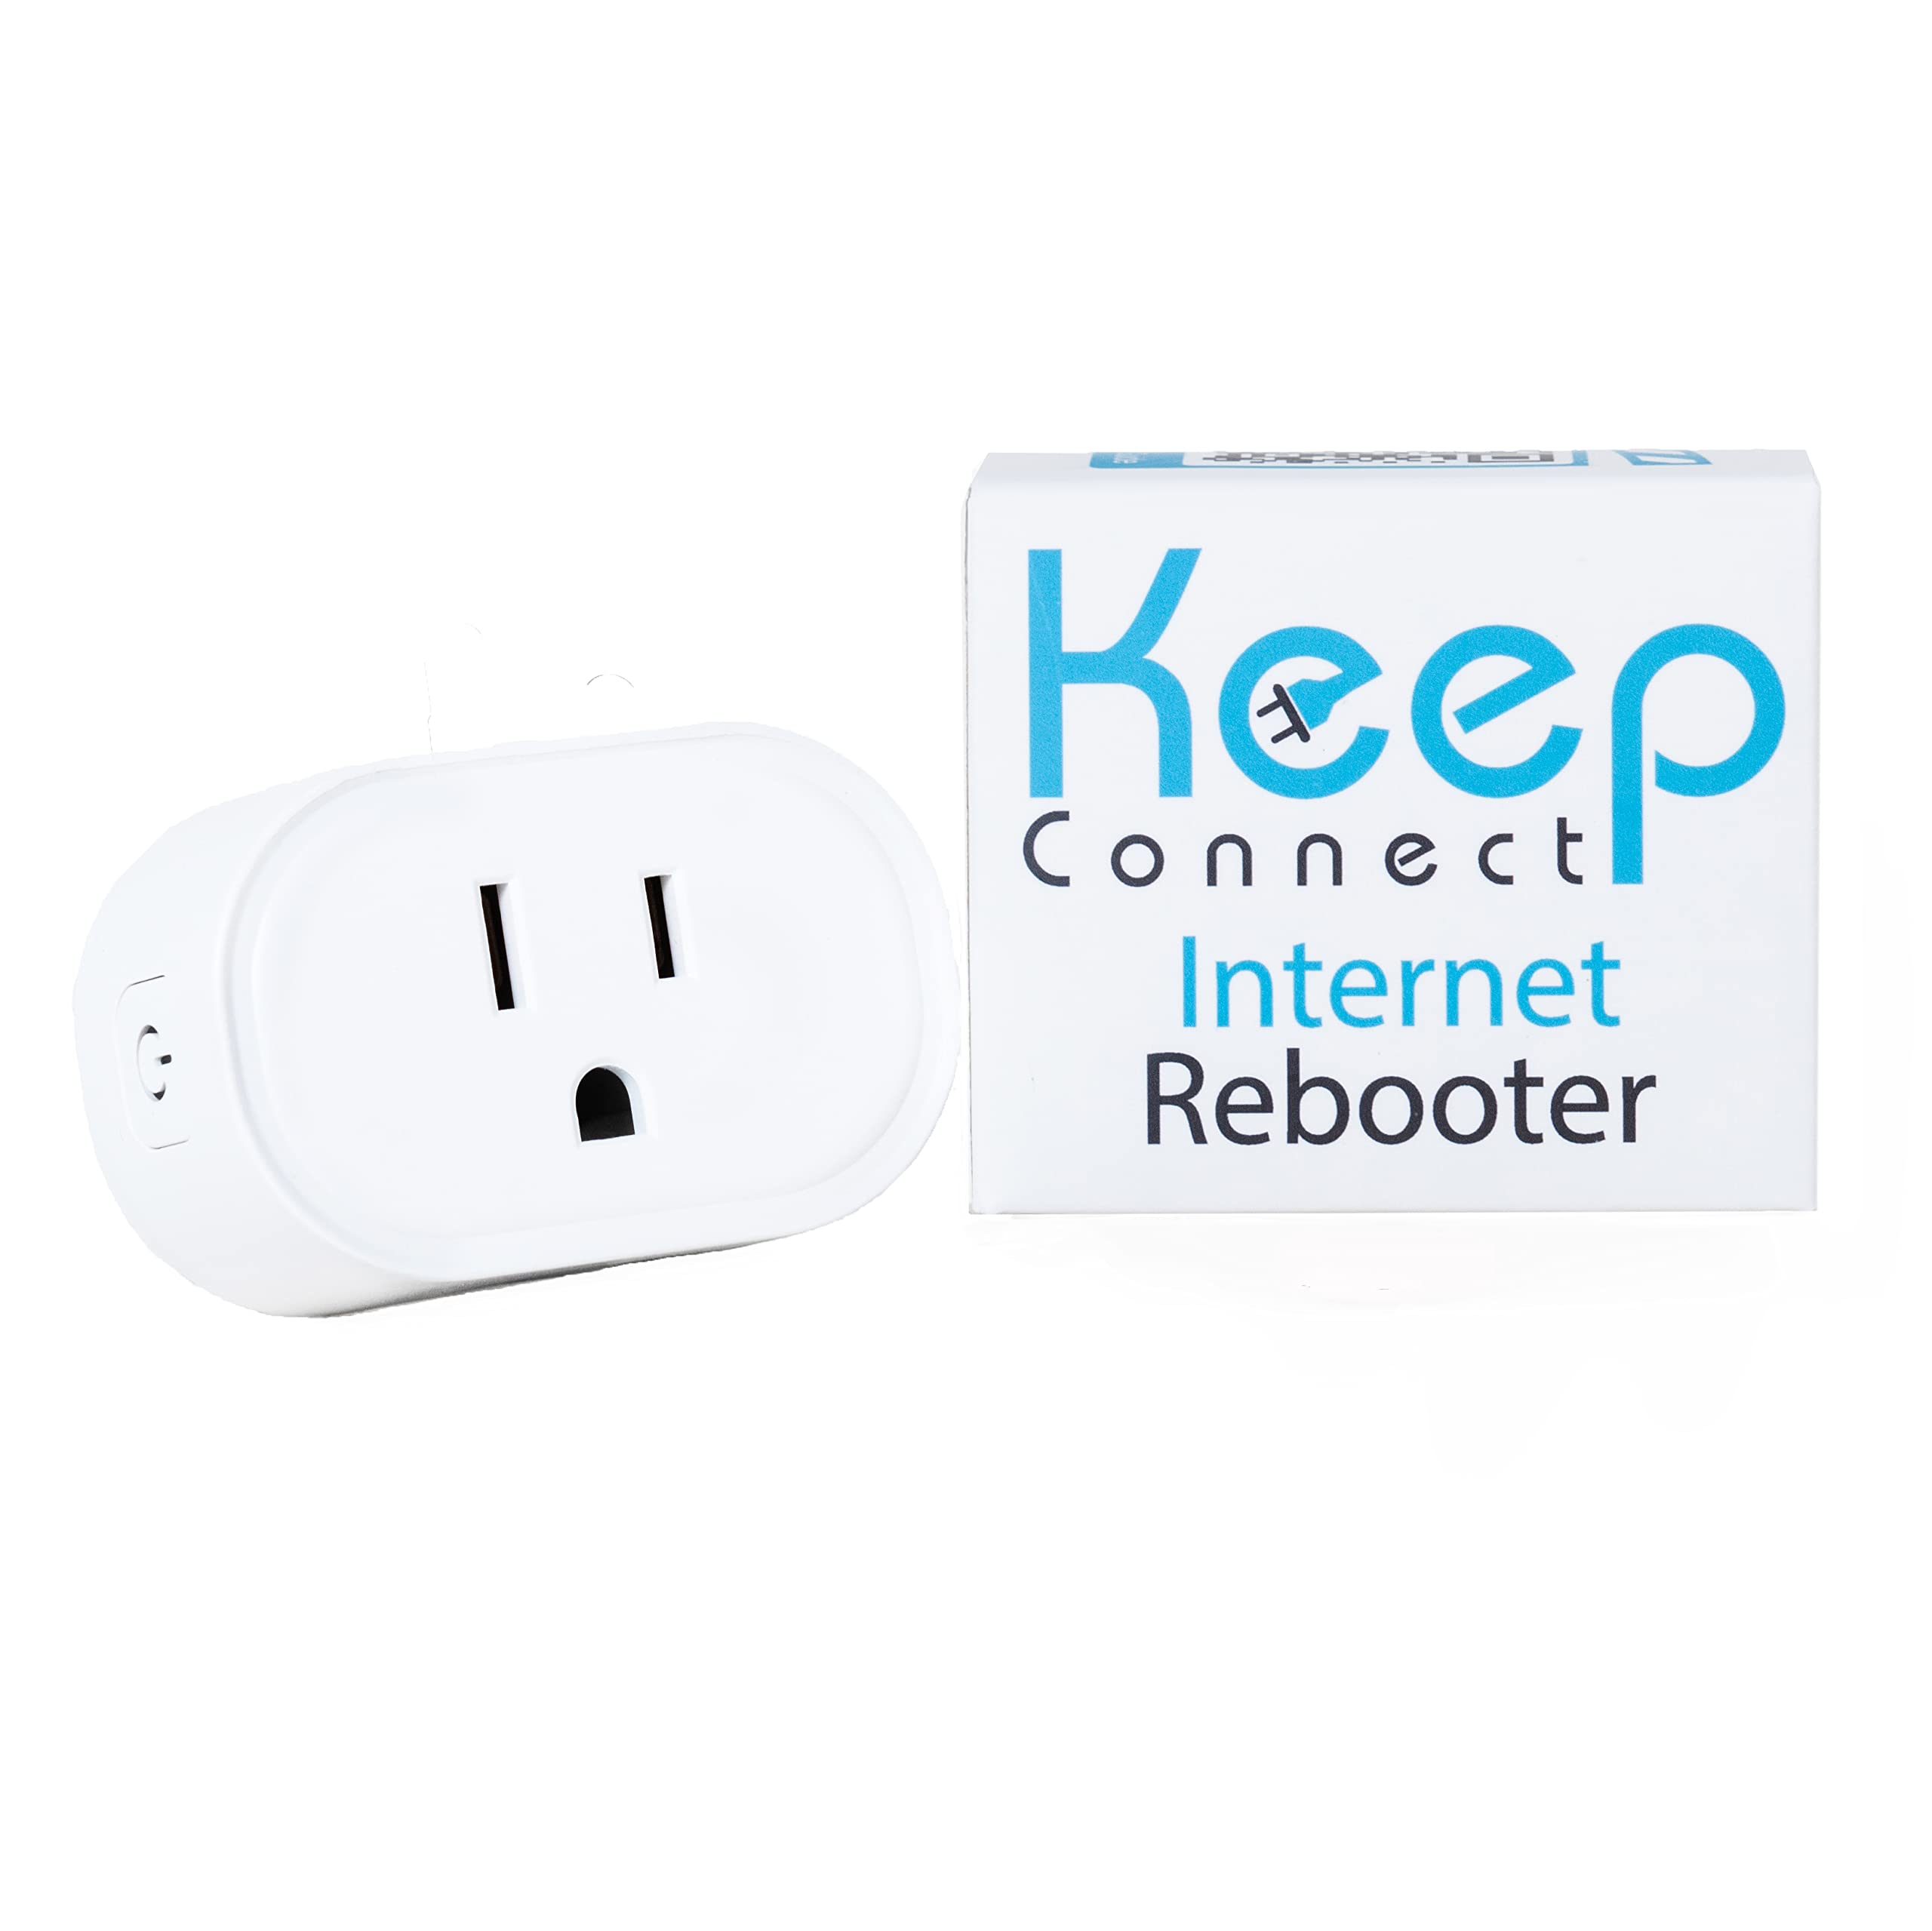 Ensure that you have a stable and reliable internet connection.
Restart your modem/router to refresh the connection.